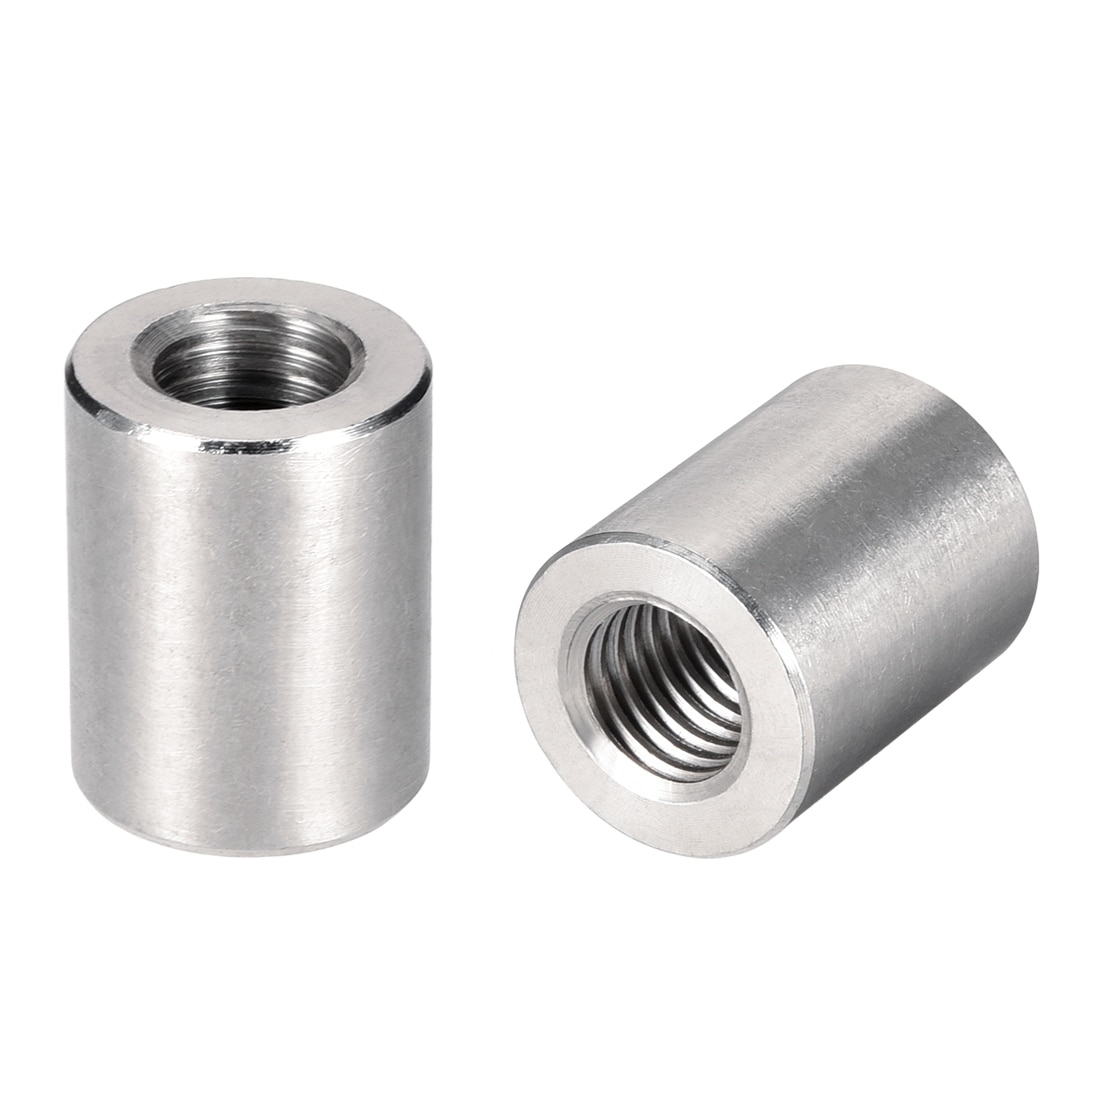 Round Connector Nuts M12x25mm Hgt Sleeve Rod Nut Stainless steel 10Pcs - Silver Tone - M12x25mm(10 pcs)